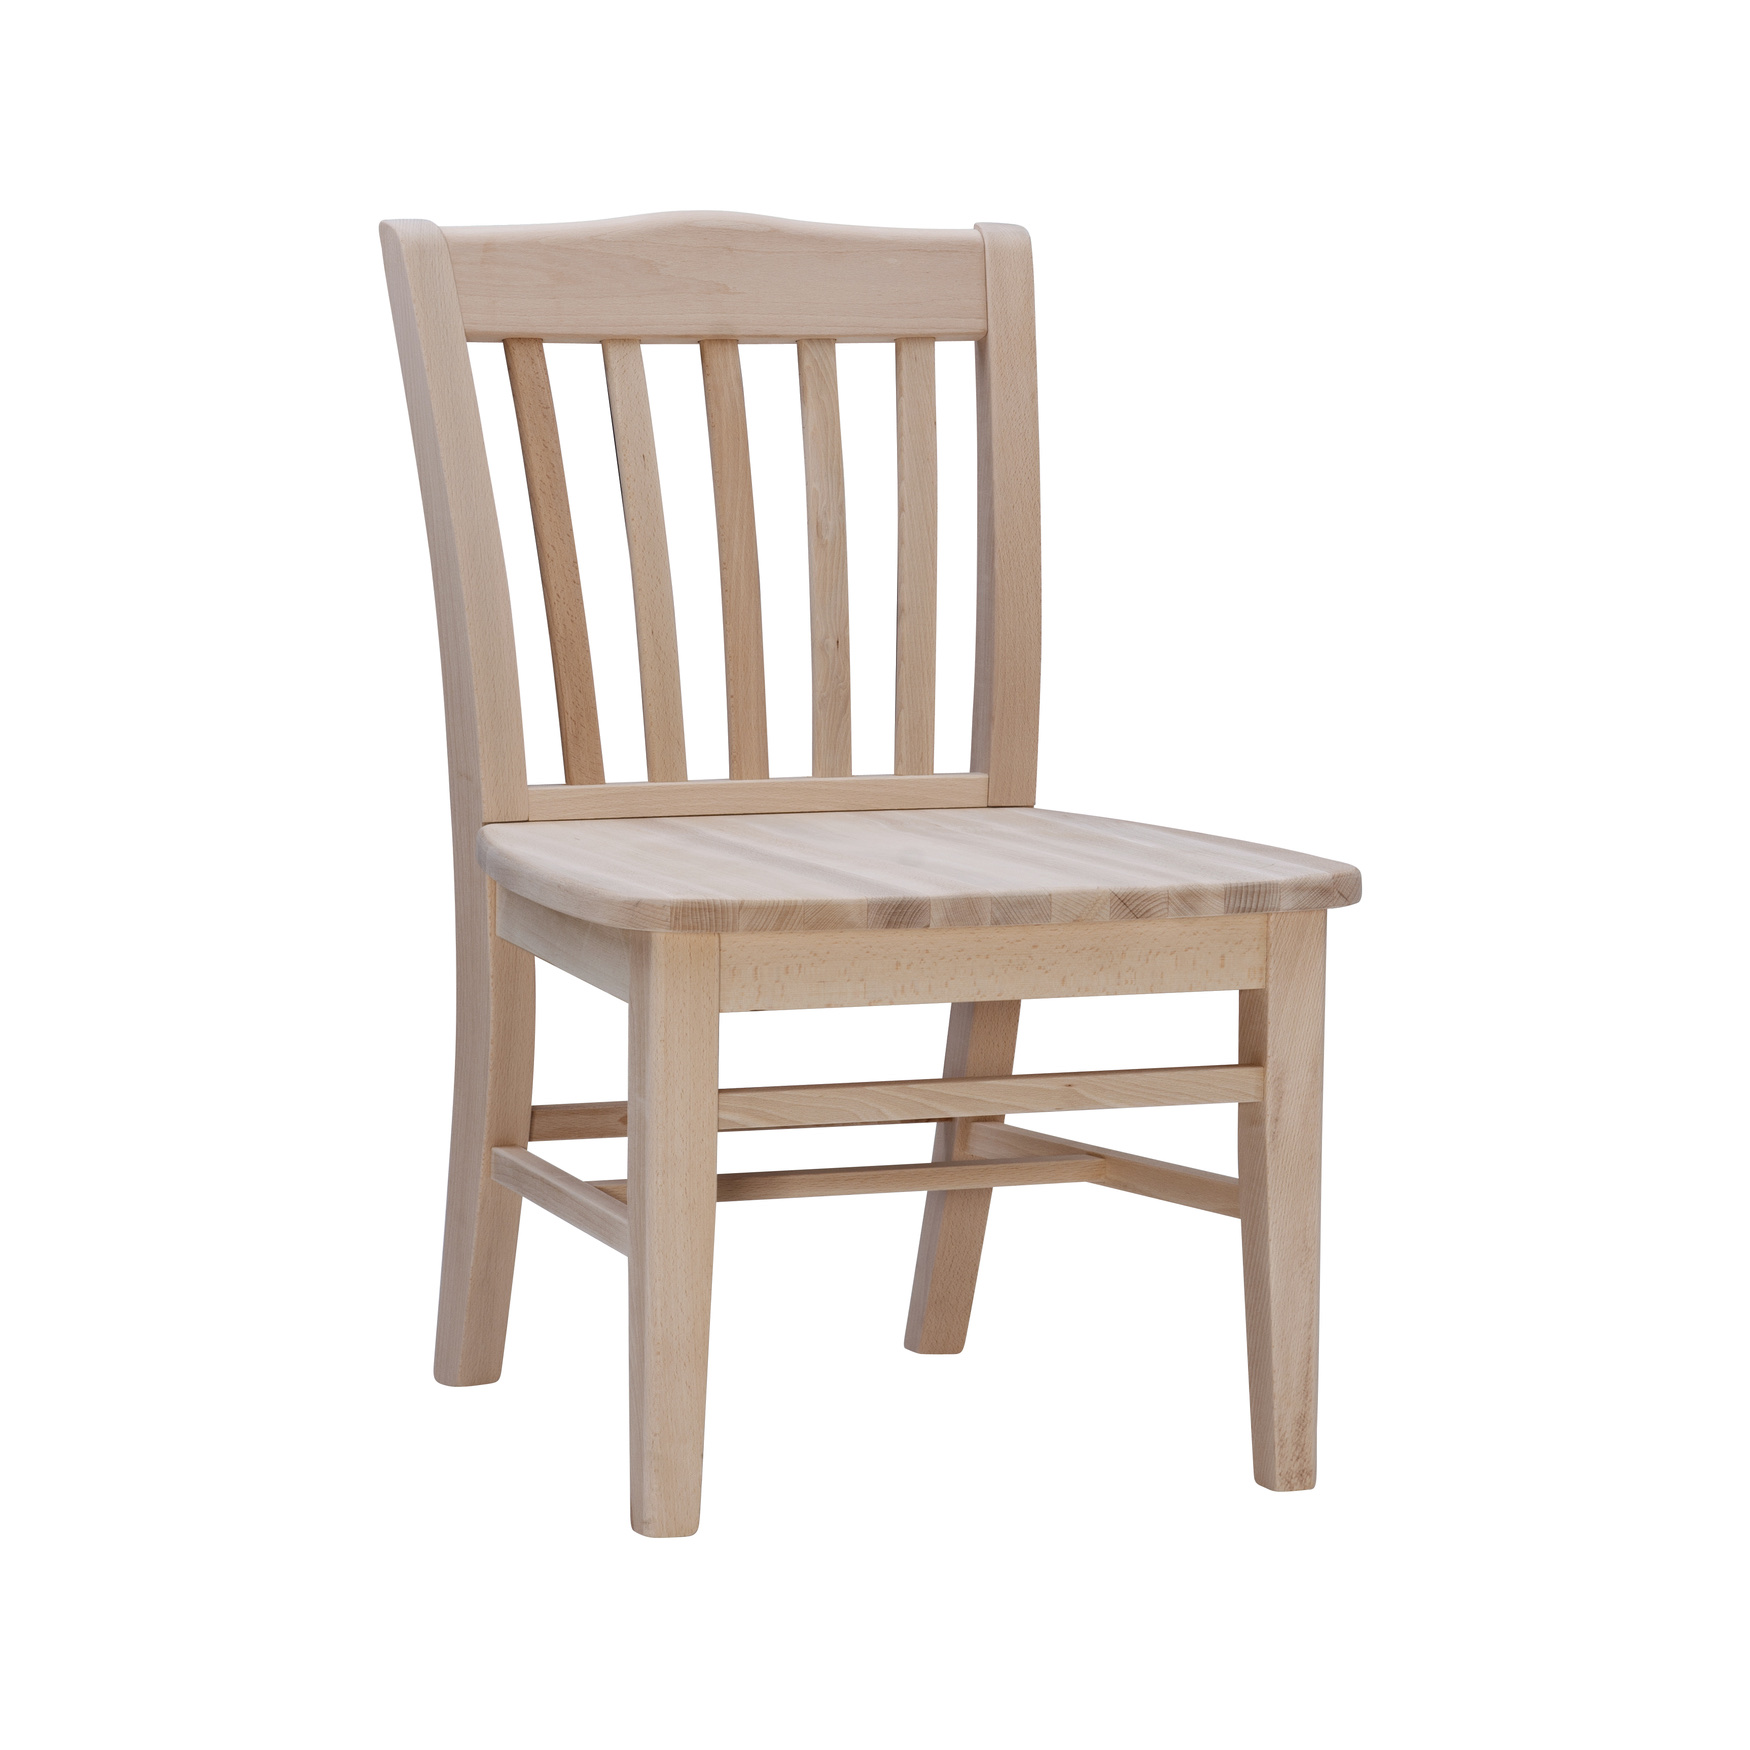 Bramwell Dining Chair Unfinished Set of 2, UNFINISHED